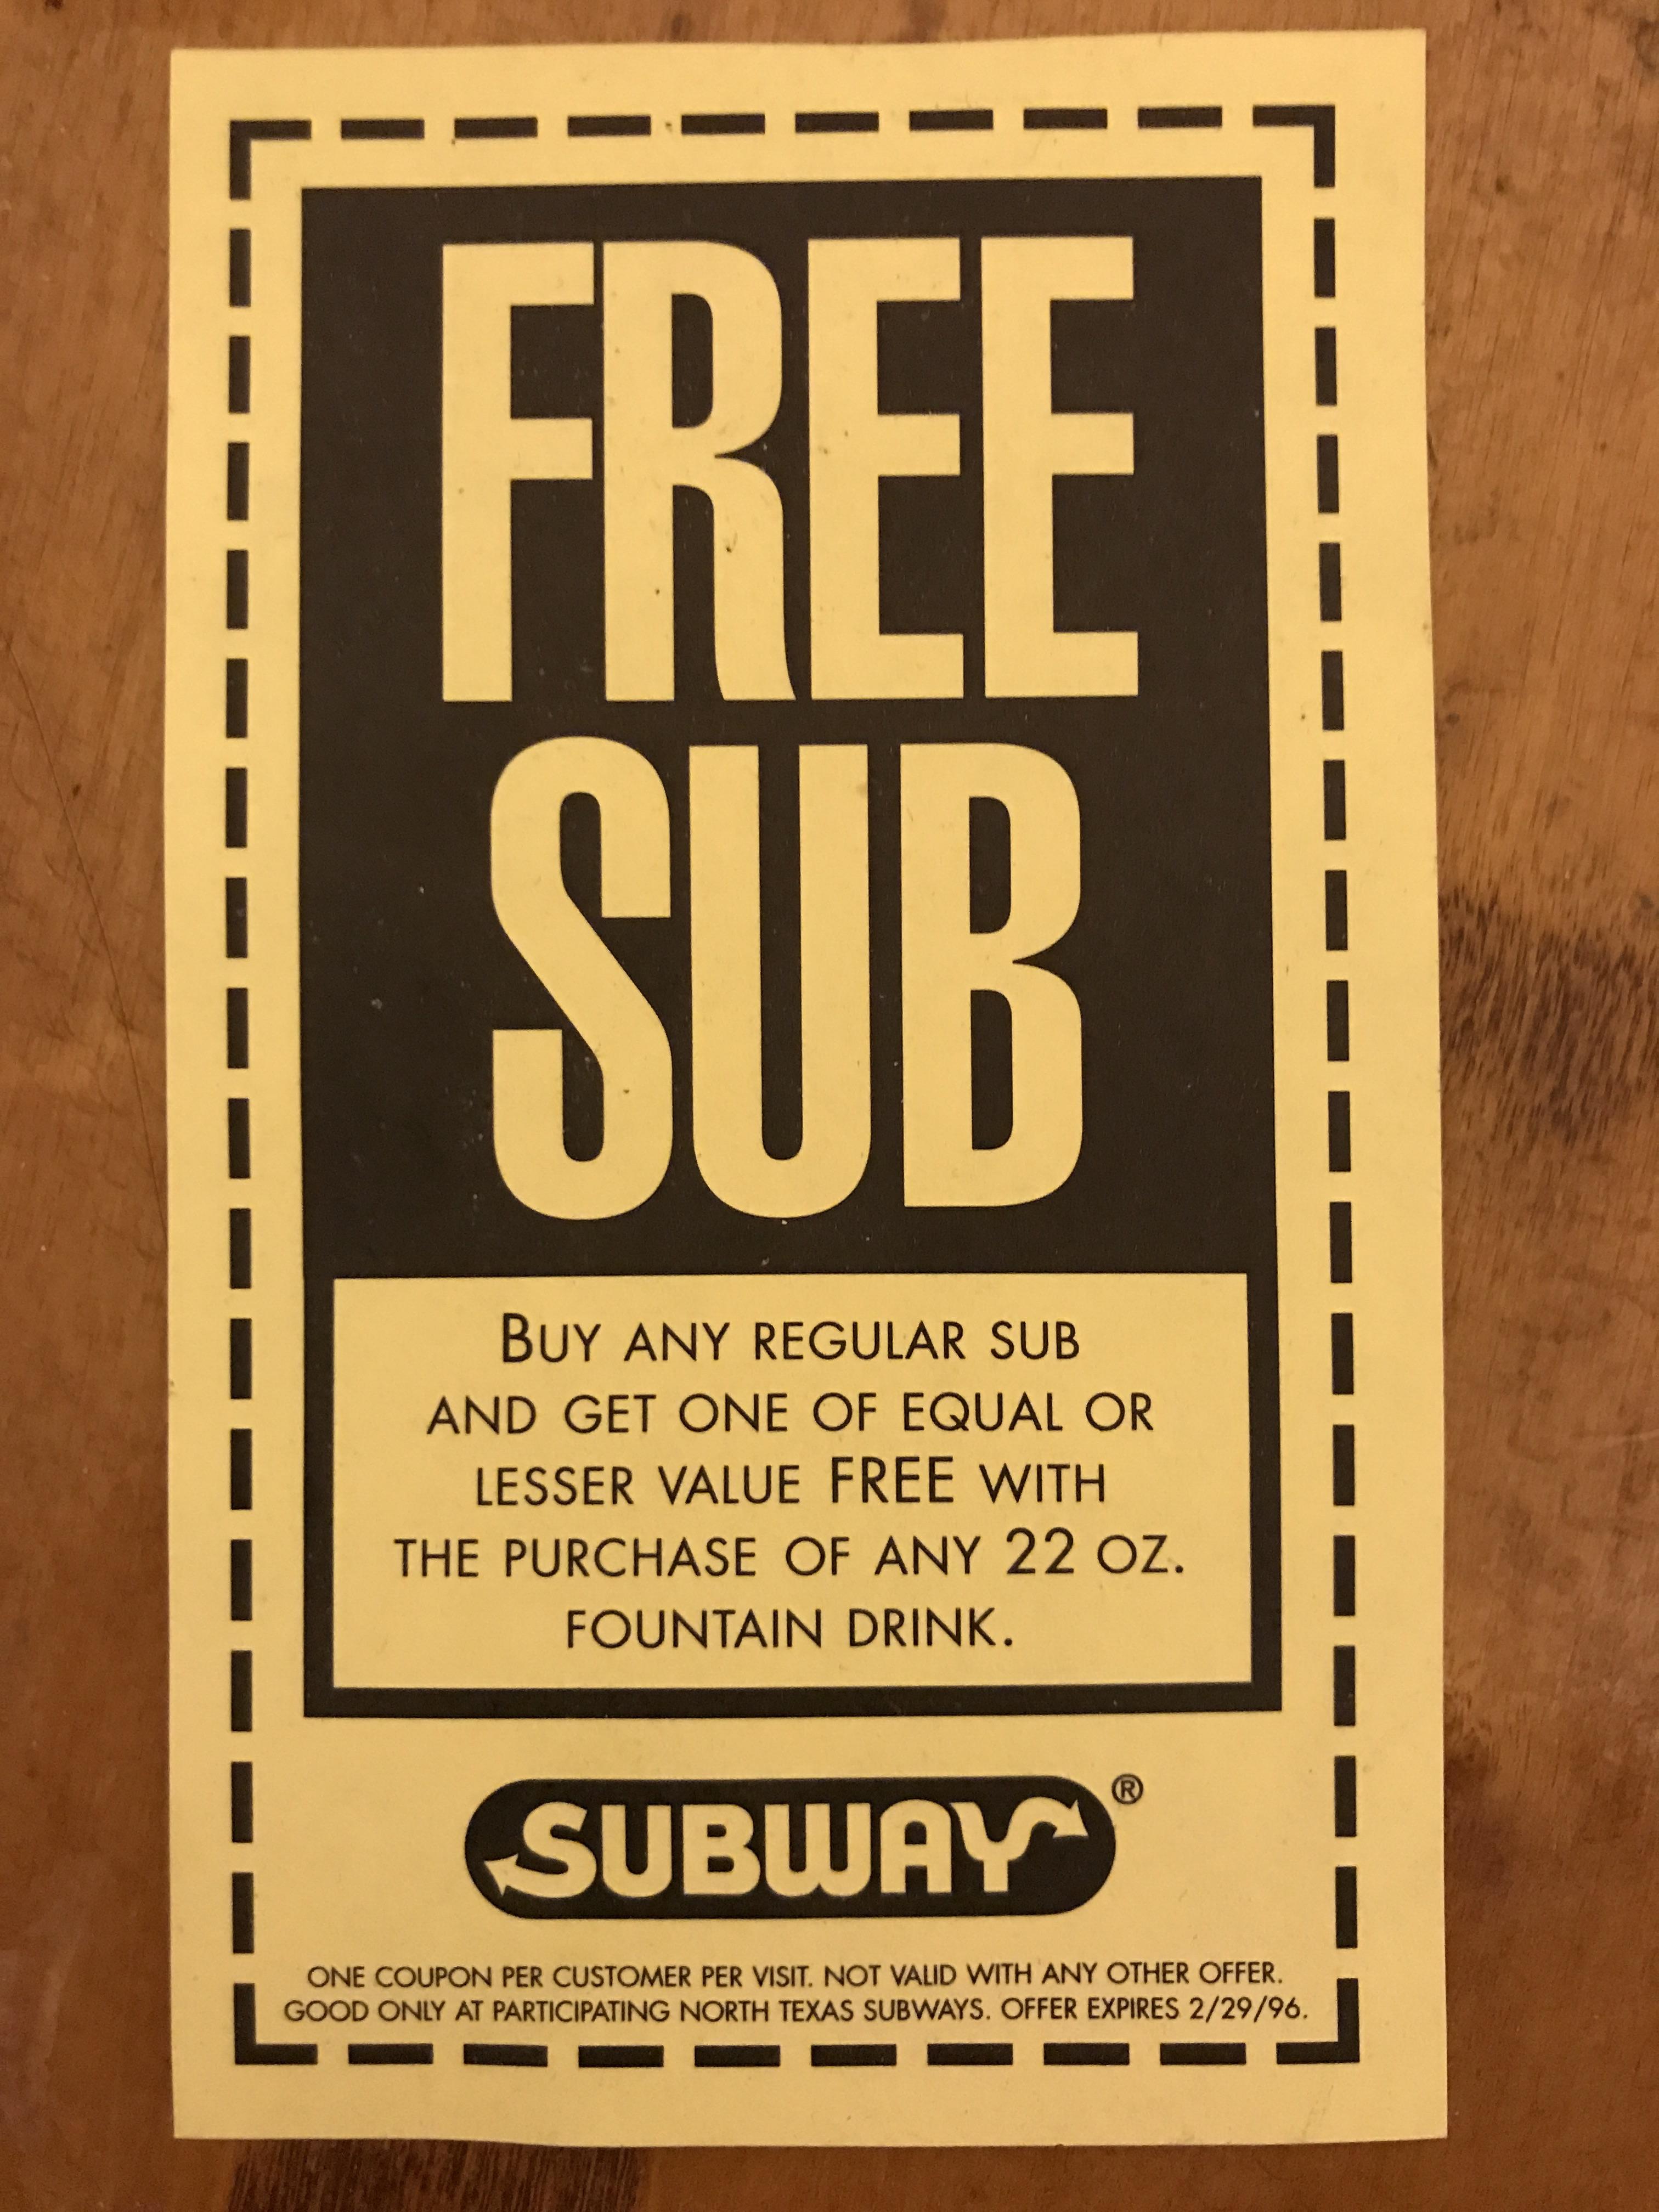 Subway Coupon Code: Buy One, Get One Free!